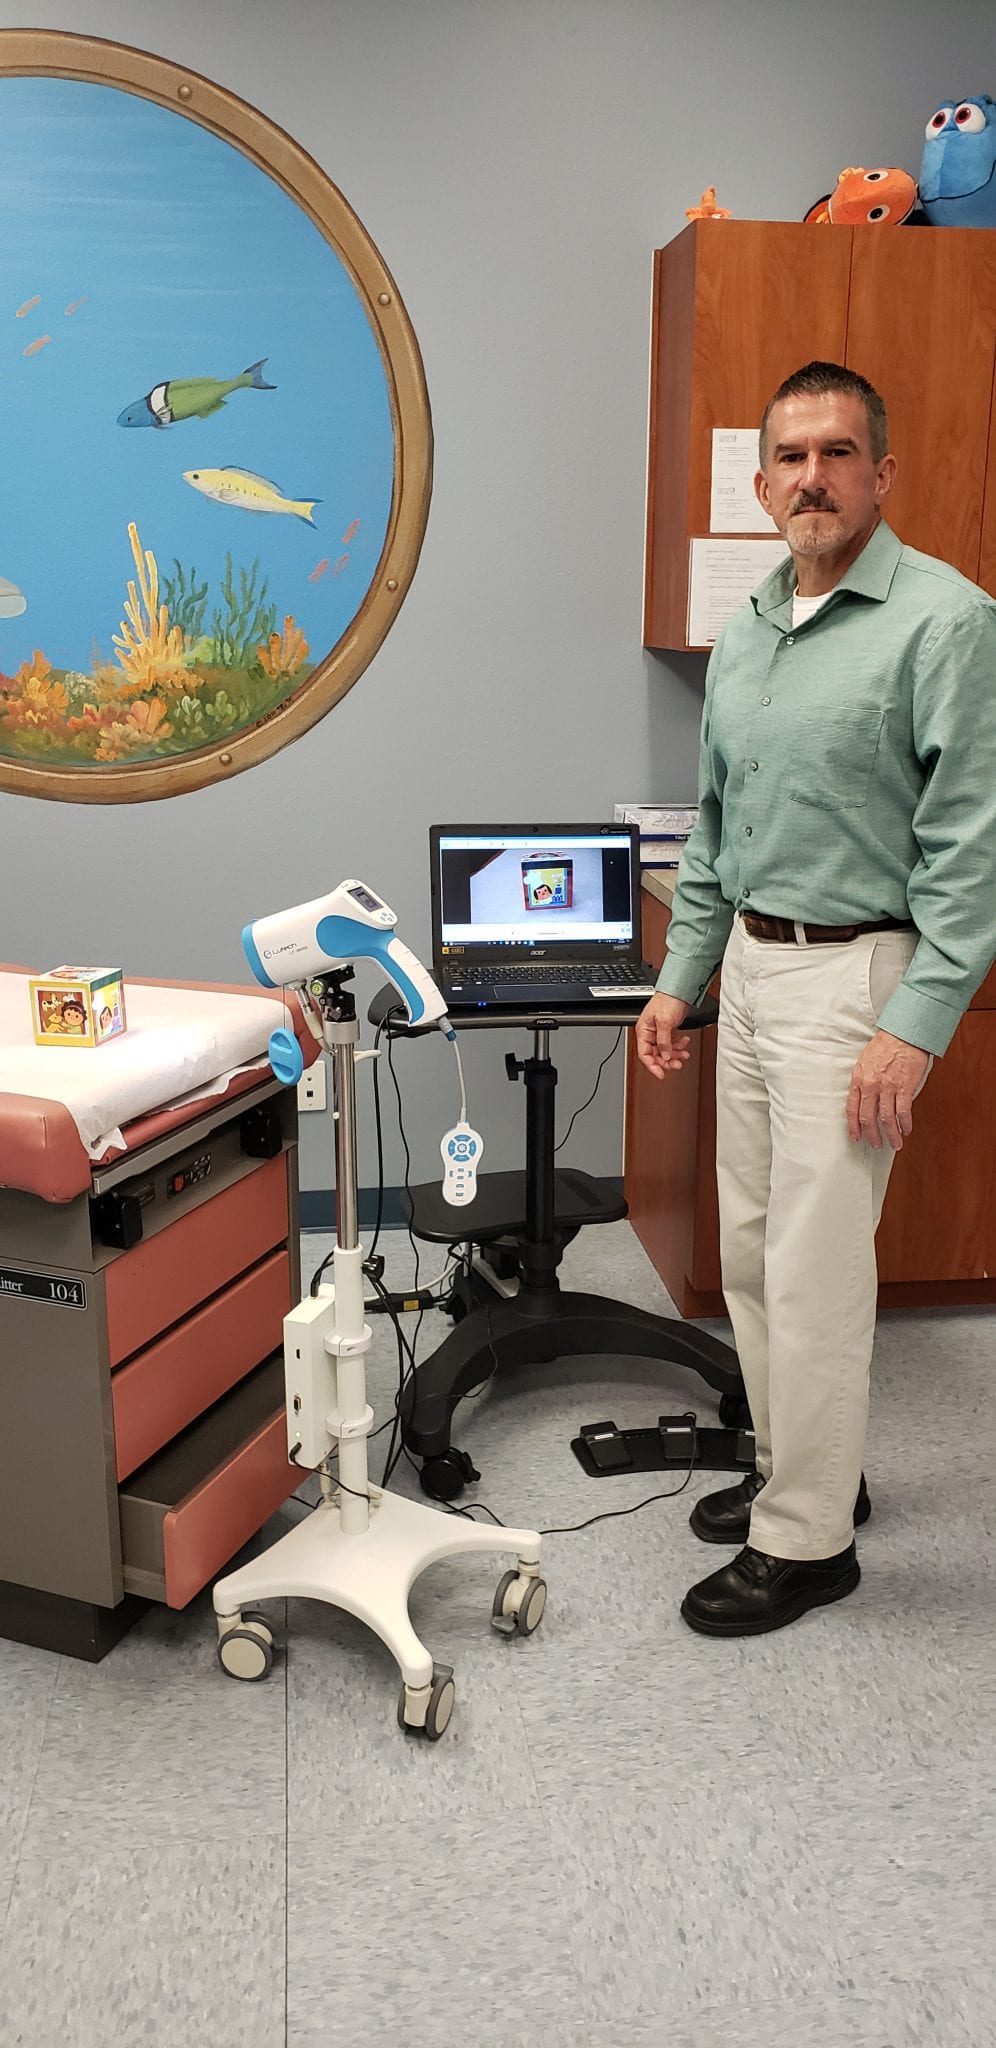 PKF Secures New Equipment for Pediatric Abuse Exams